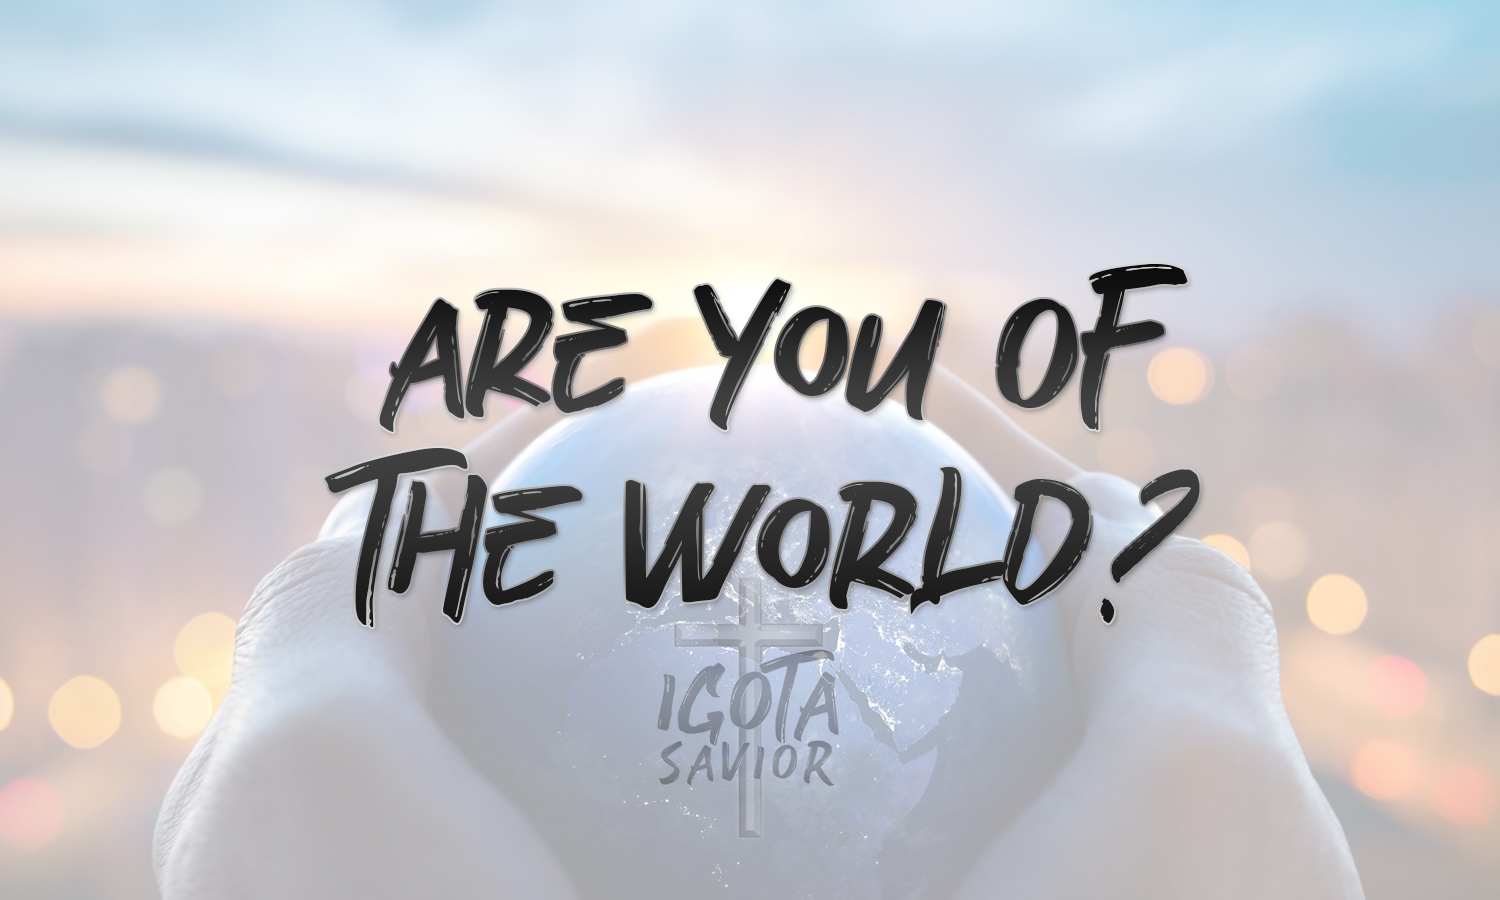 Are You Of The World?